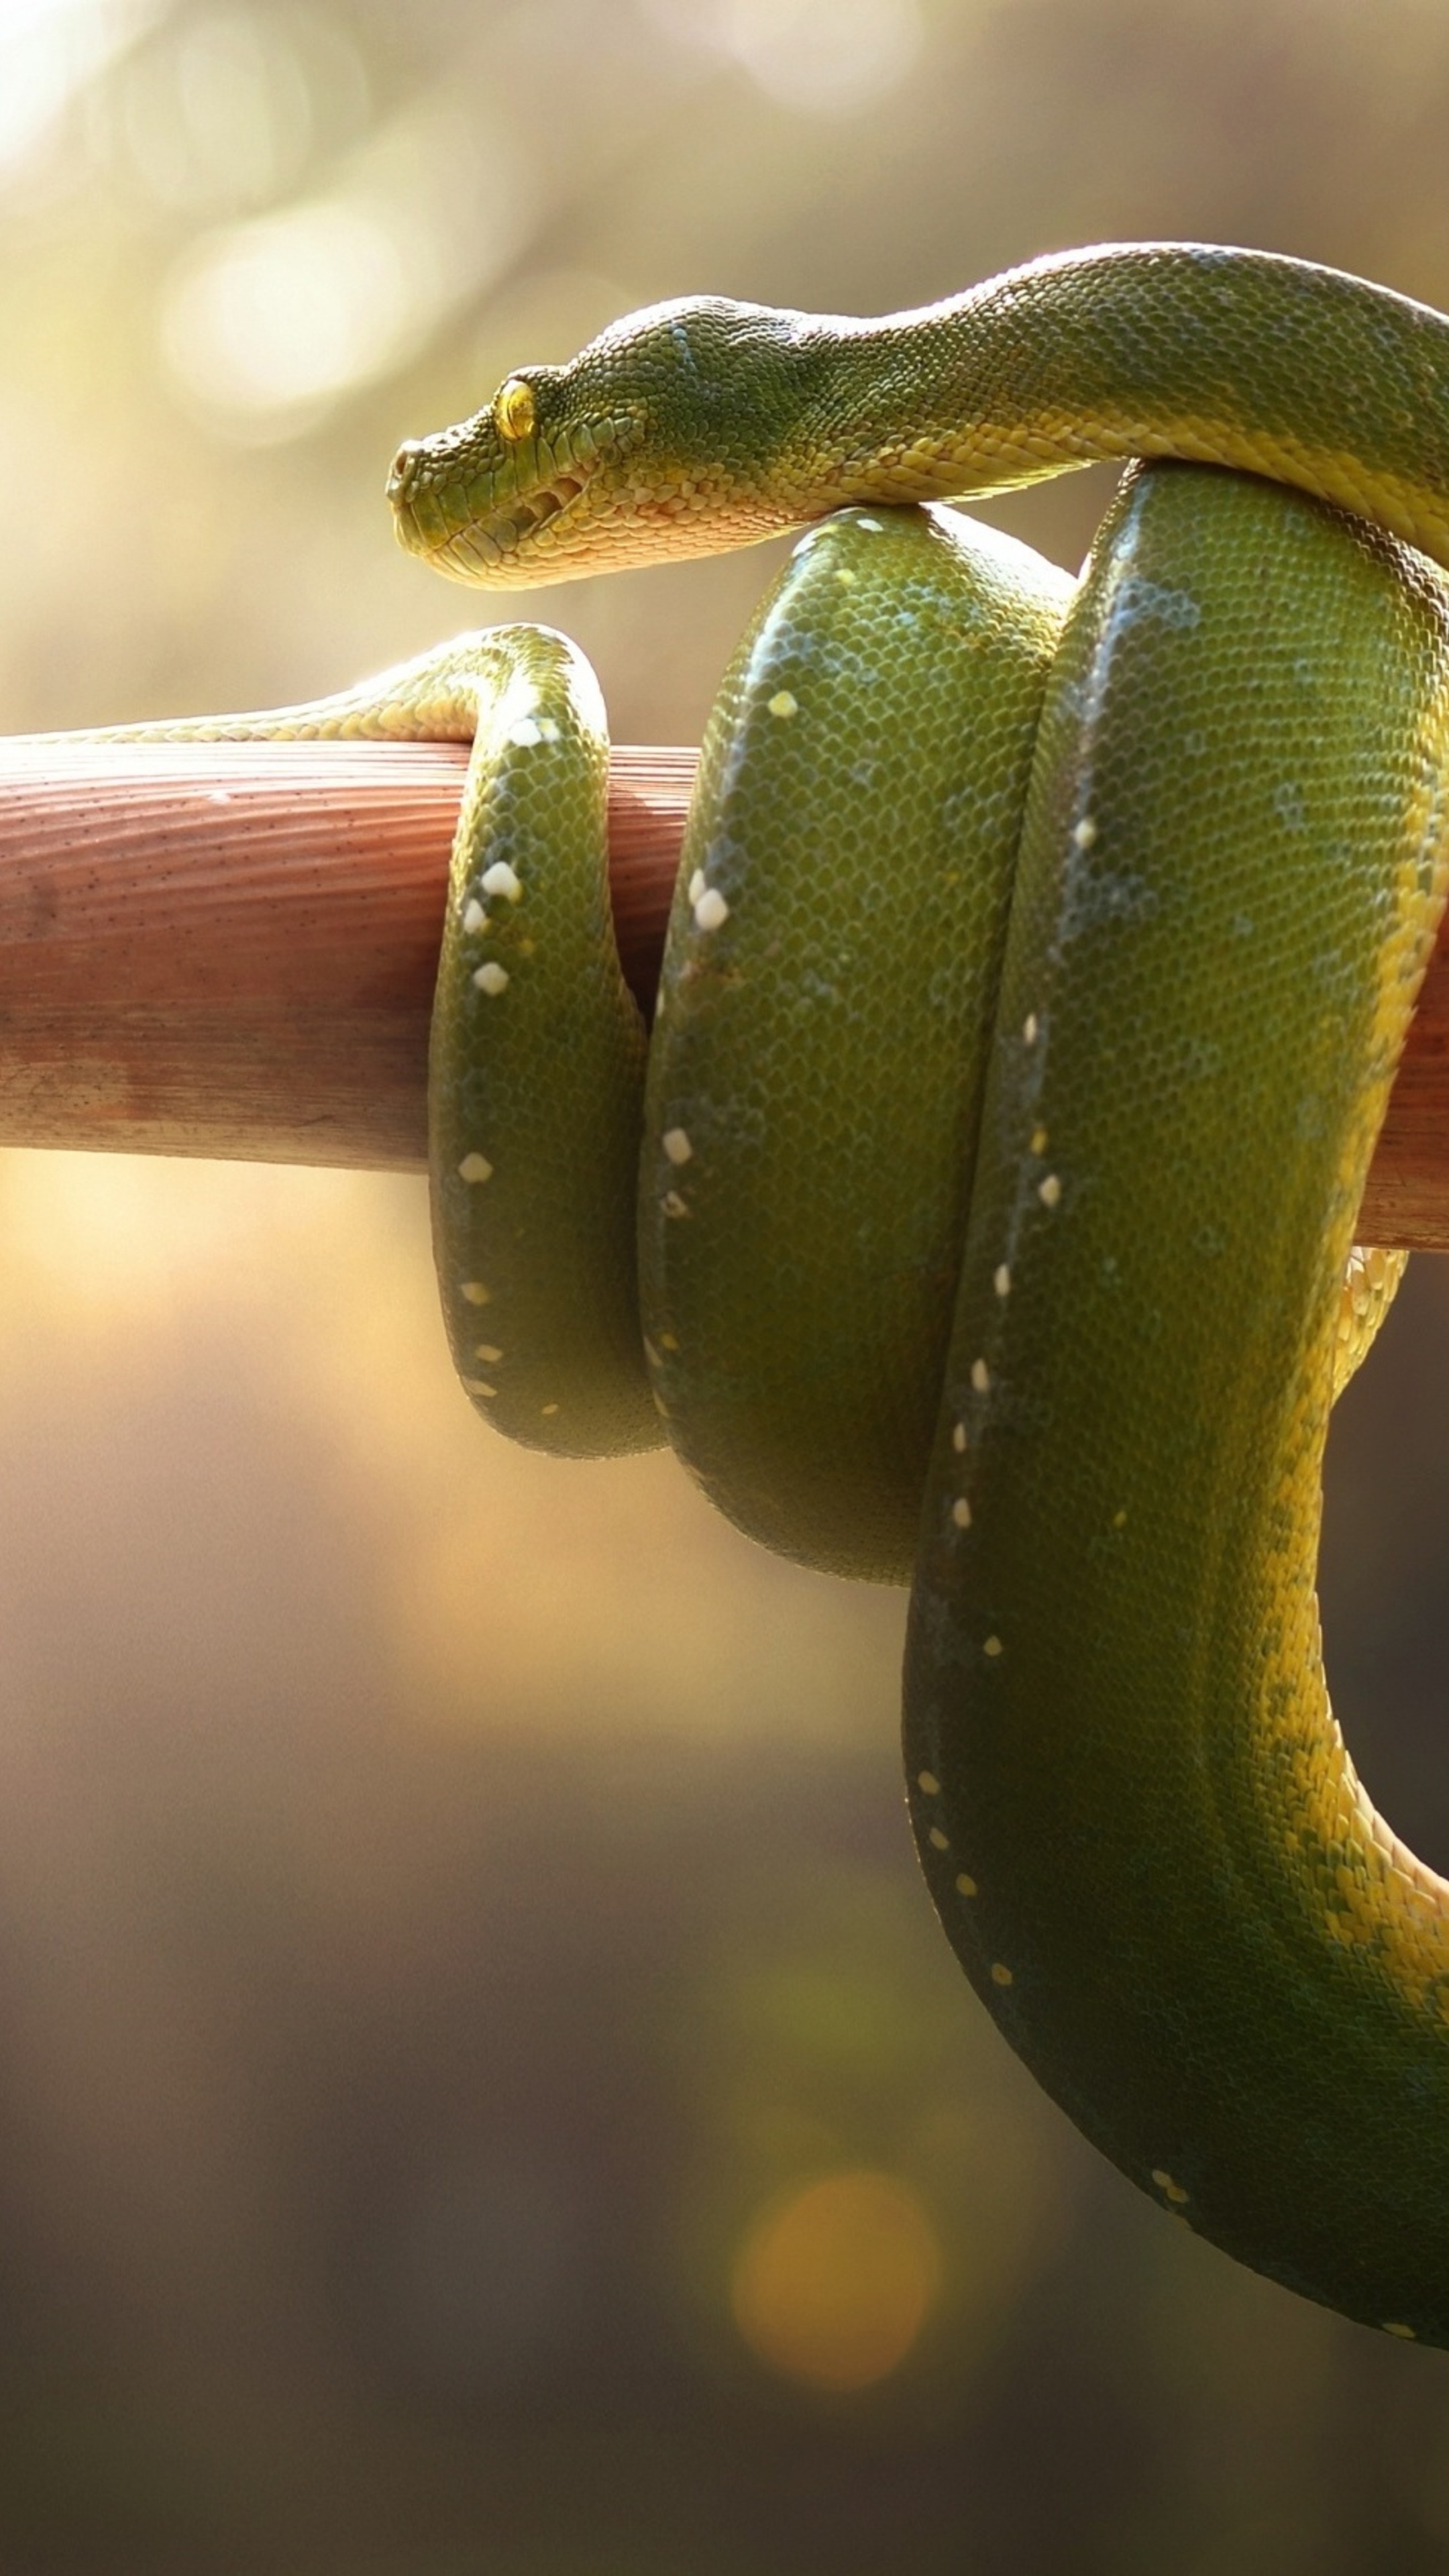 Boa Green Snake, Xperia HD Wallpapers, Premium 4K Images, Sony Xperia, 2160x3840 4K Handy